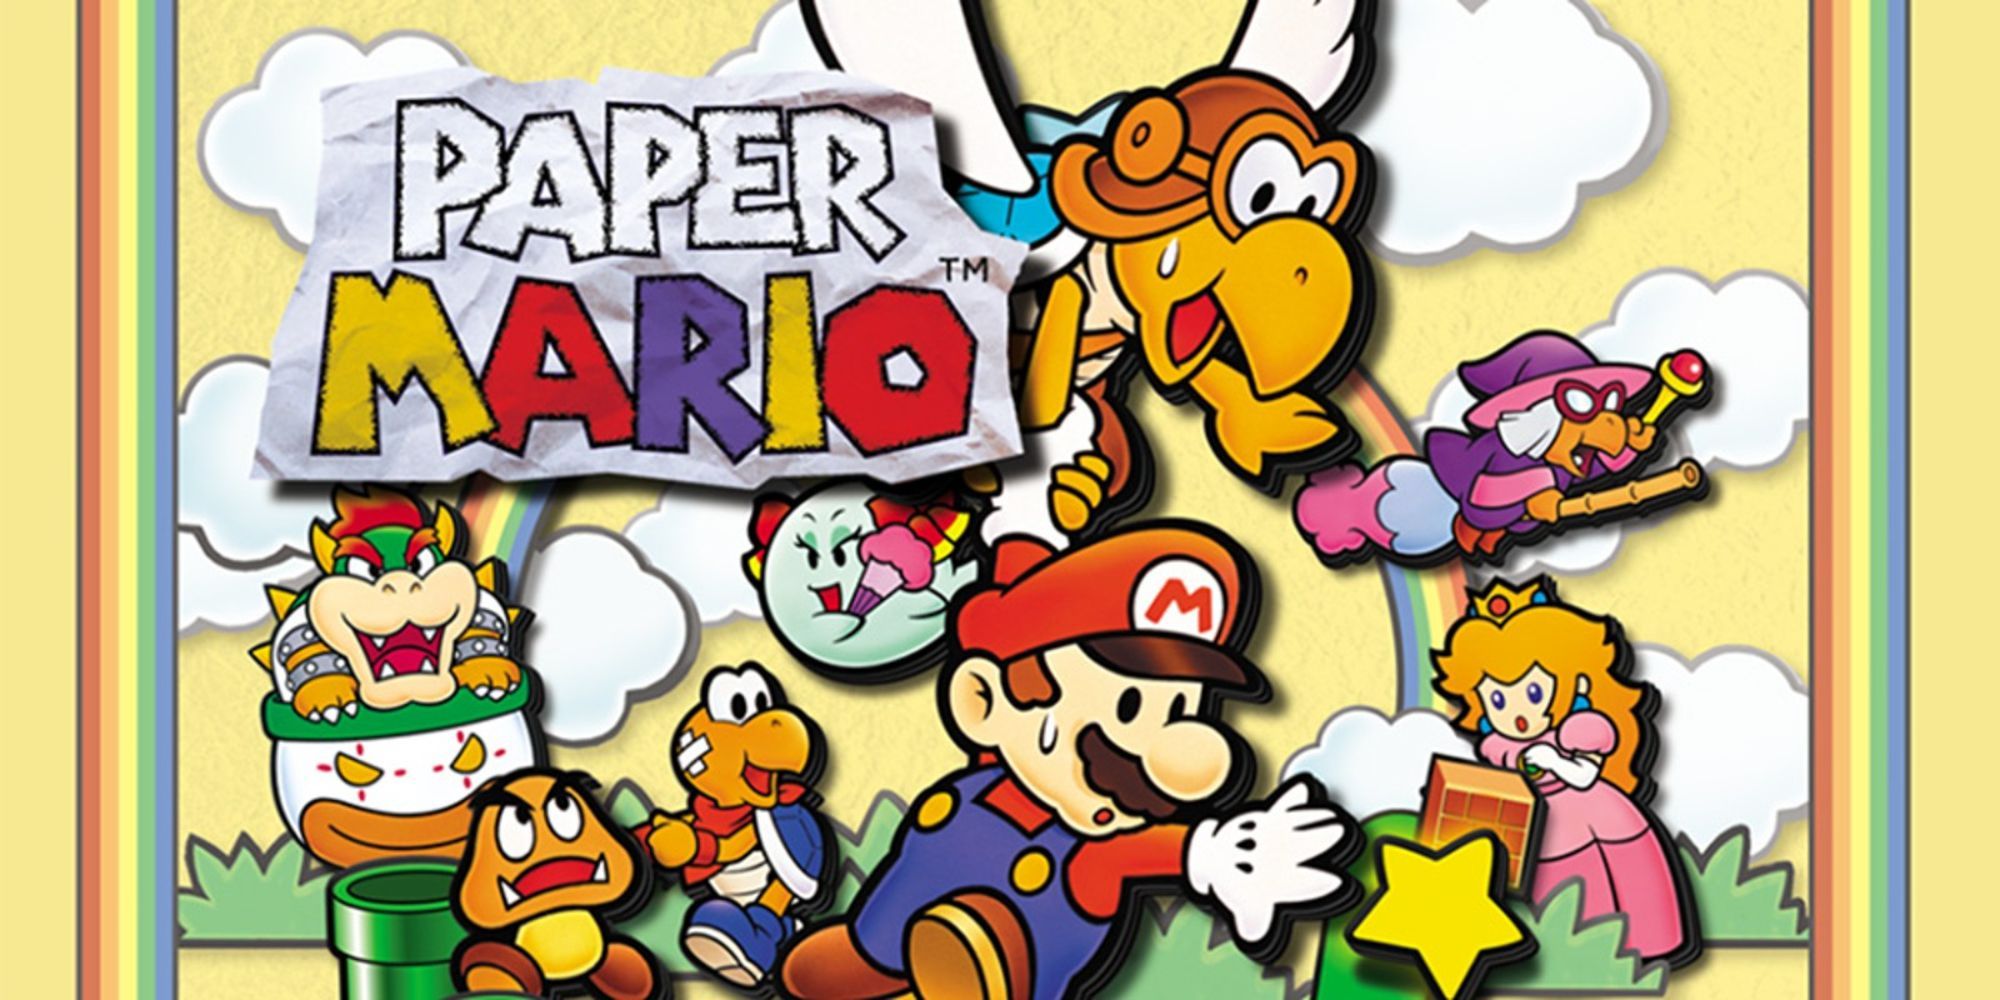 Mario stuck with Koopa in promotional art for Paper Mario